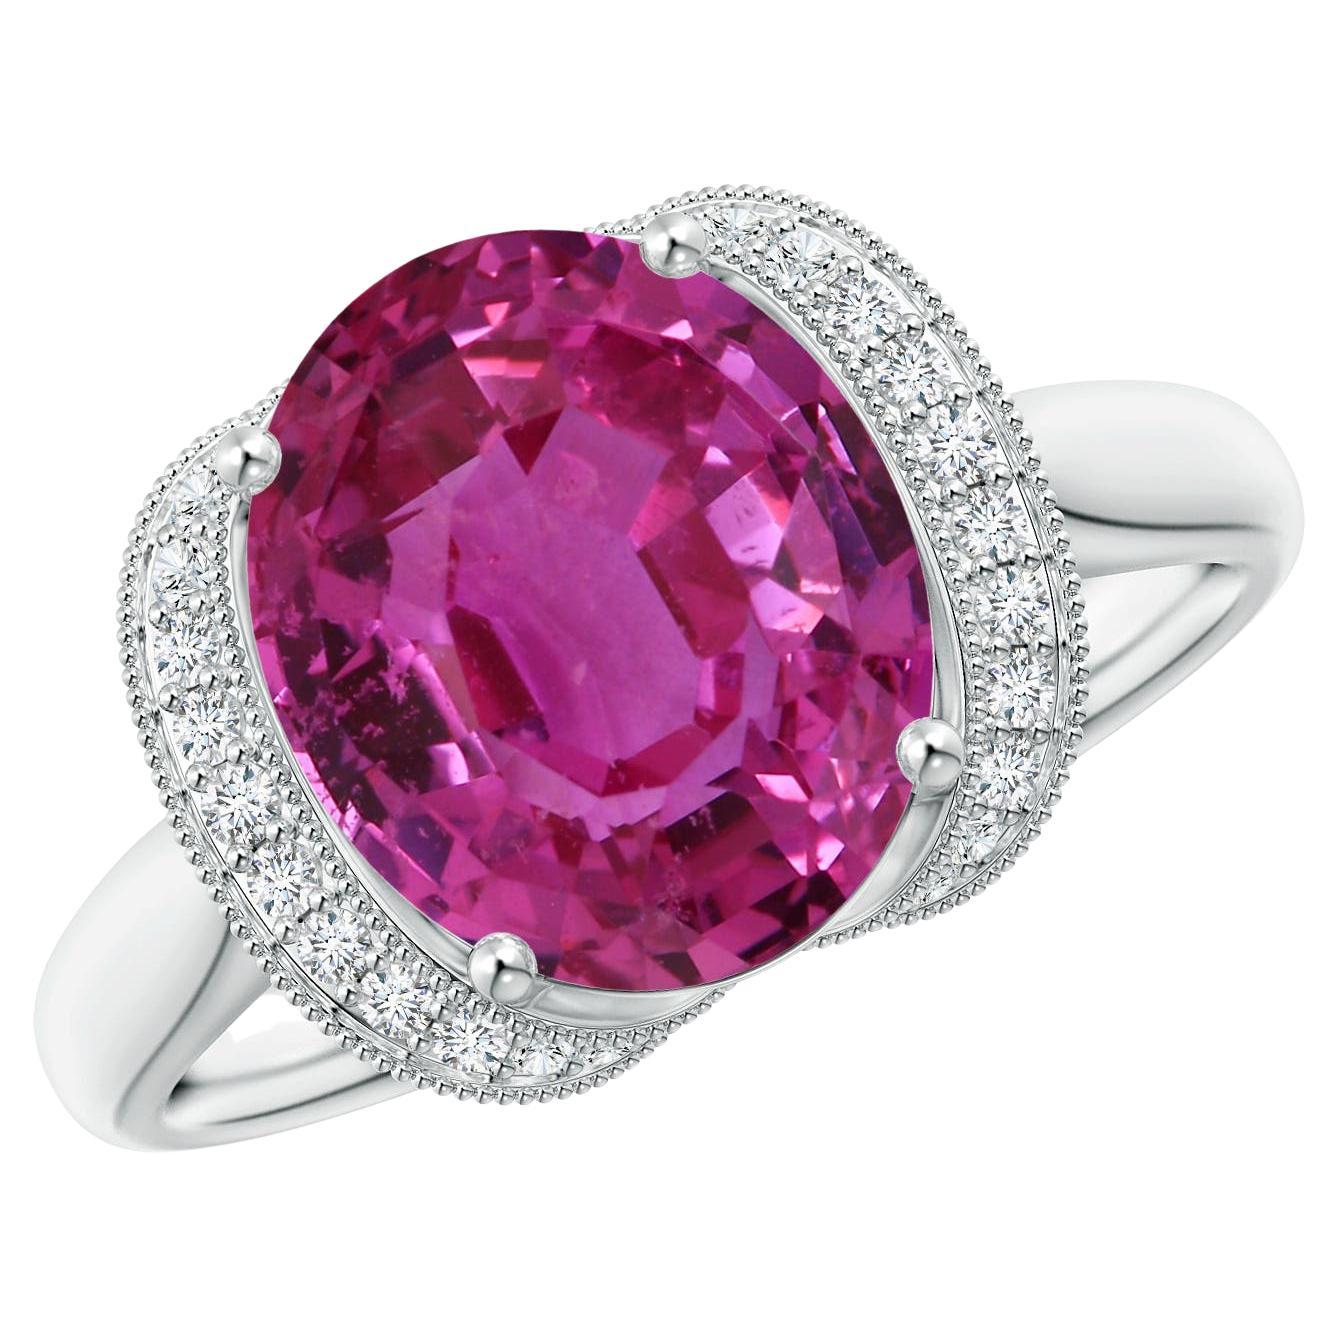 For Sale:  Angara Gia Certified Pink Sapphire Ring in White Gold with Diamond Half Halo